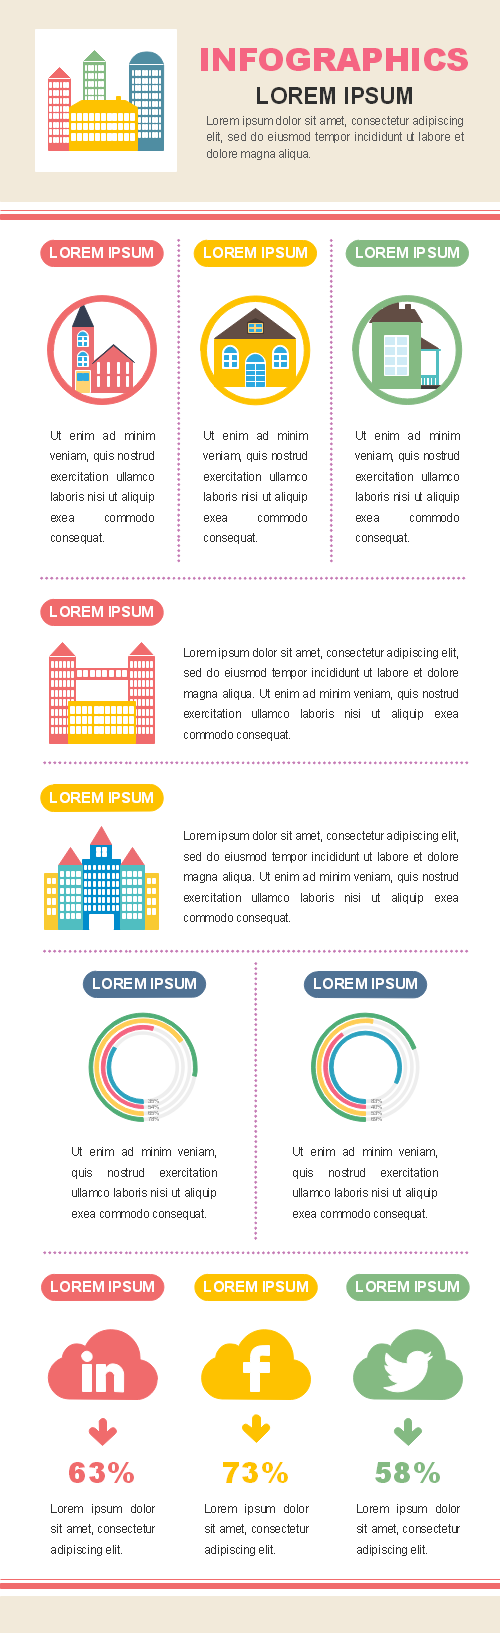 7 Different Types of Infographics and When to Use Them